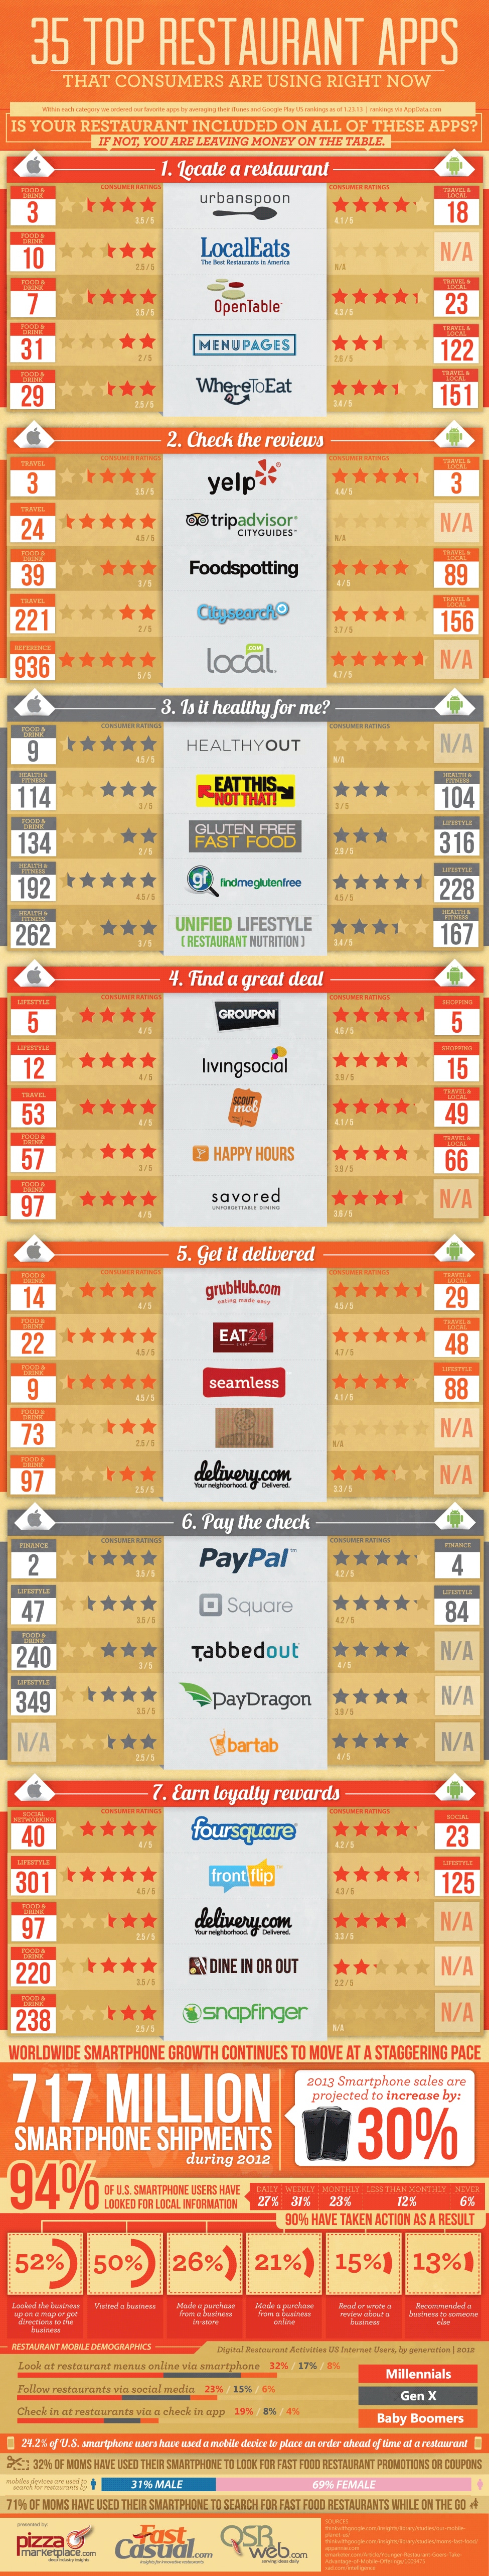 35 Most Popular Restaurant Apps Right Now [Infographic]